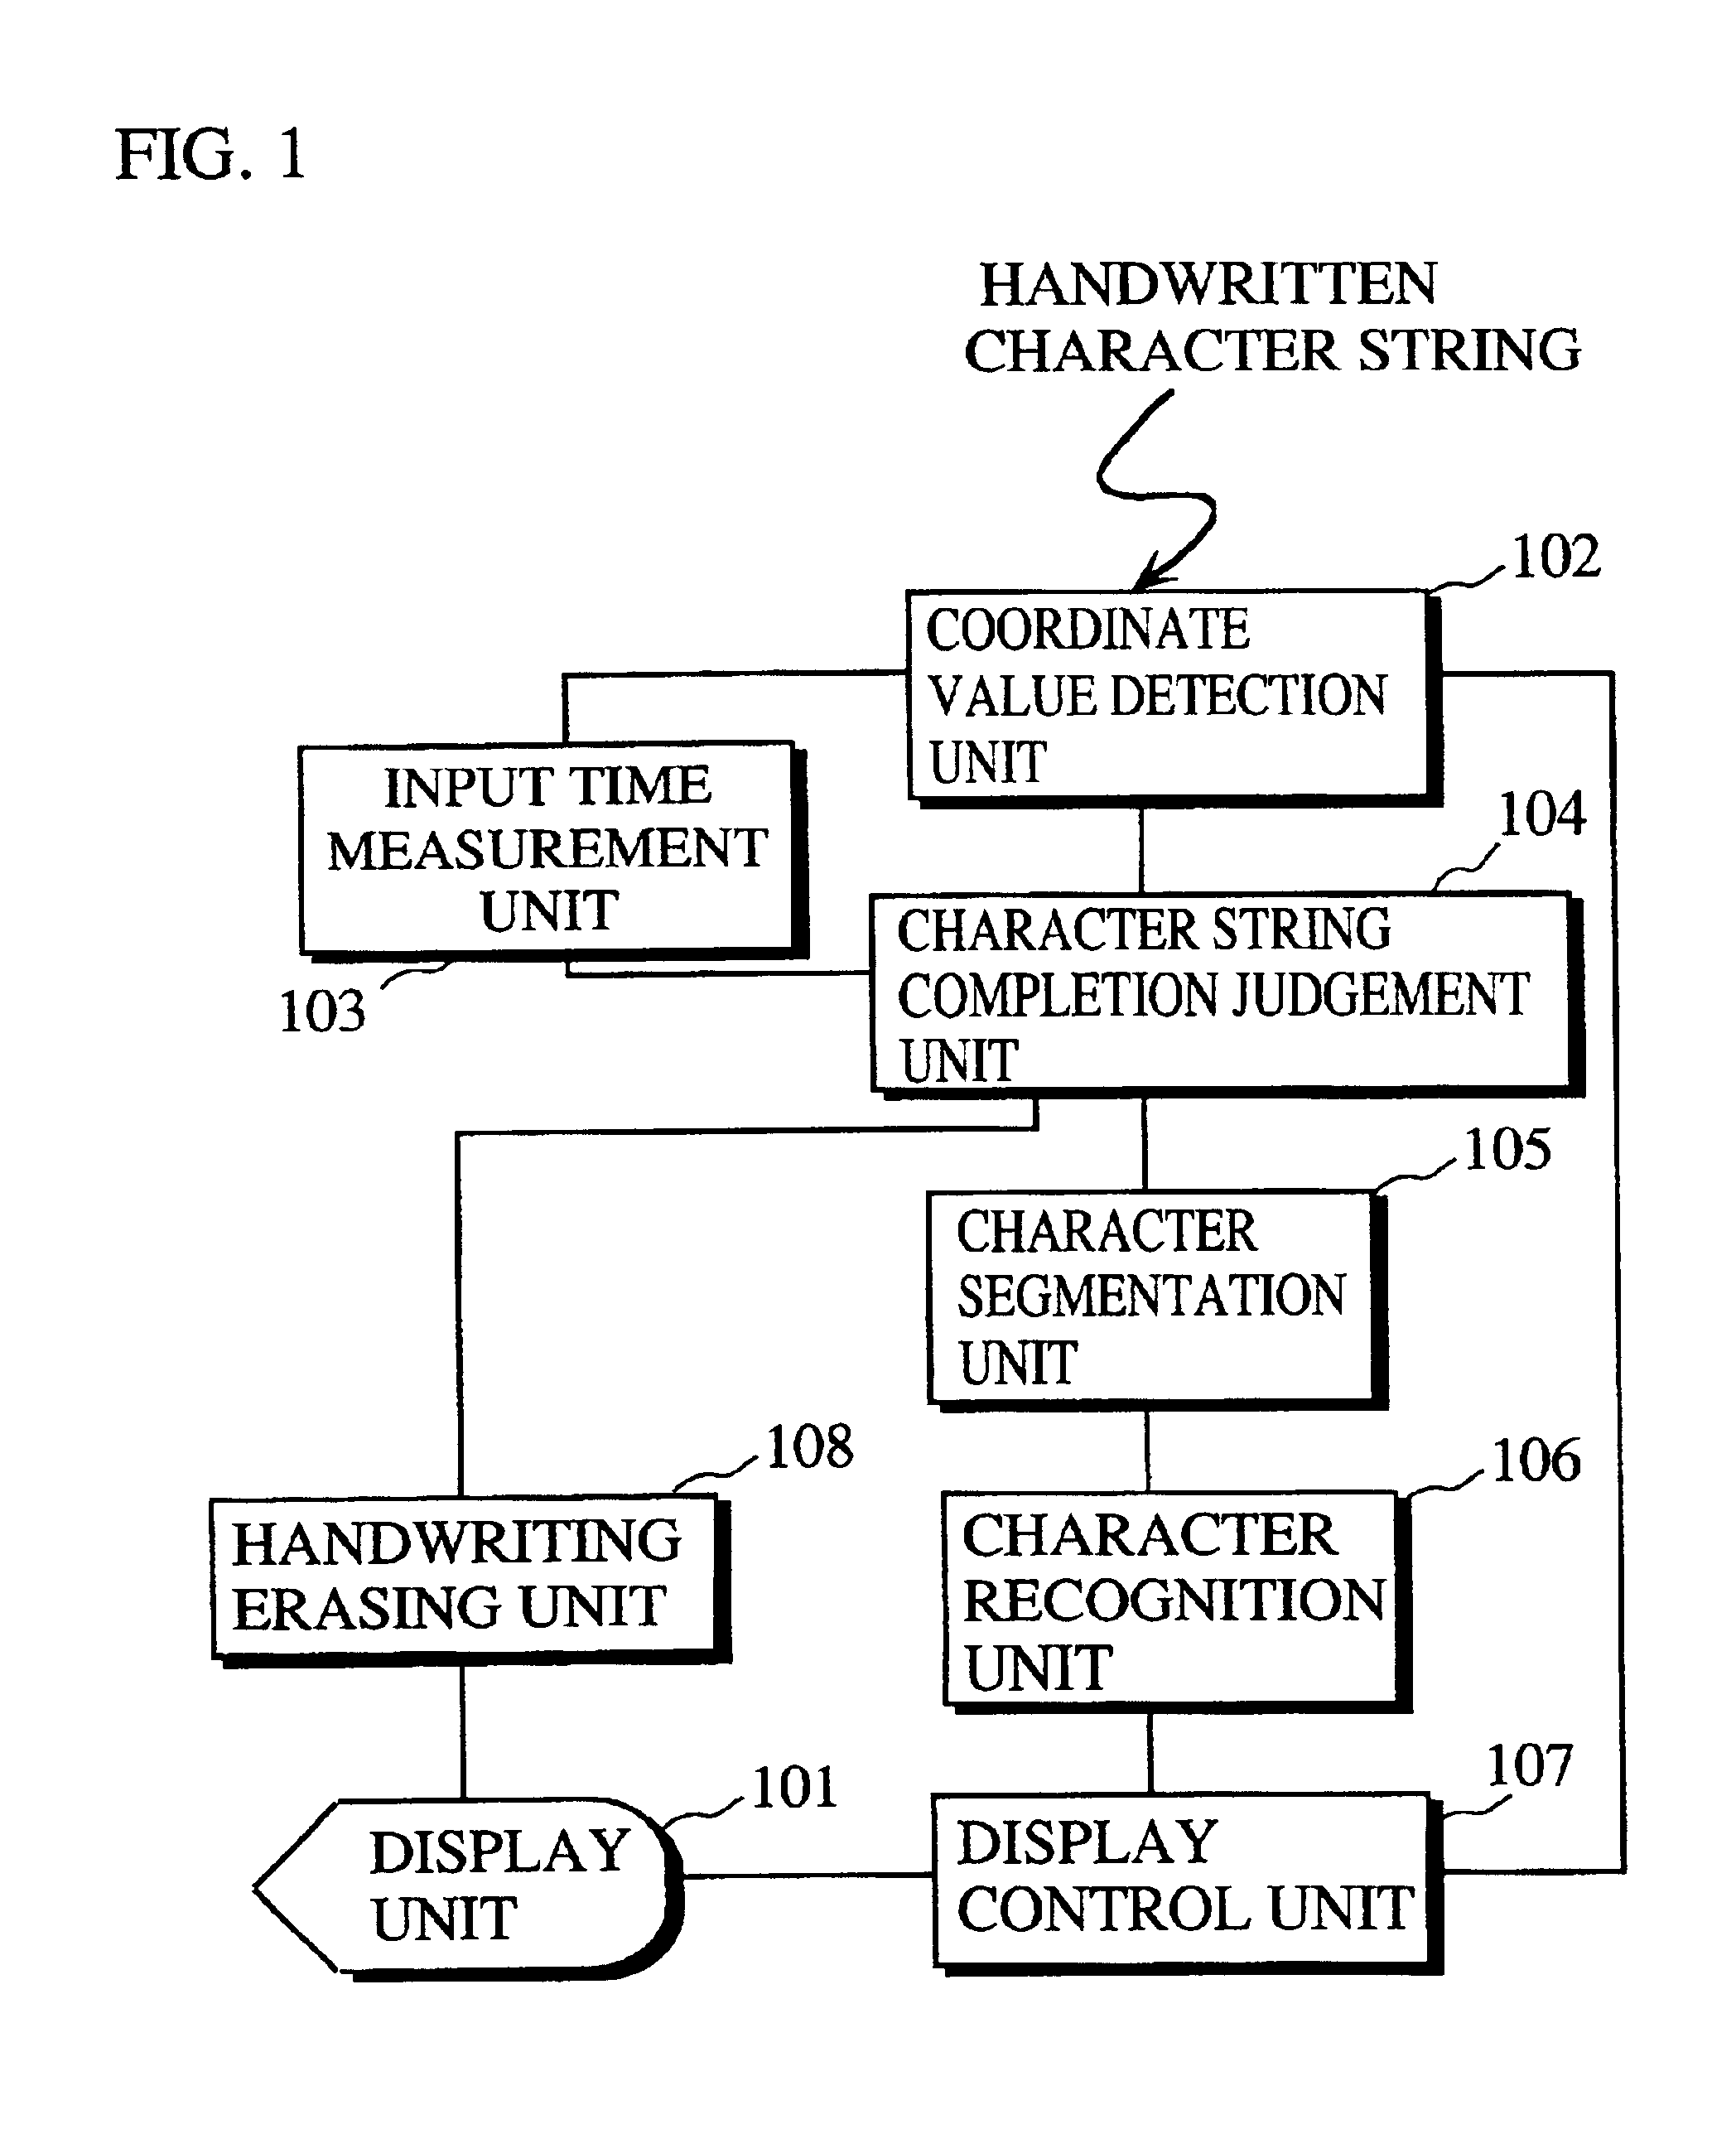 Handwritten character recognition apparatus